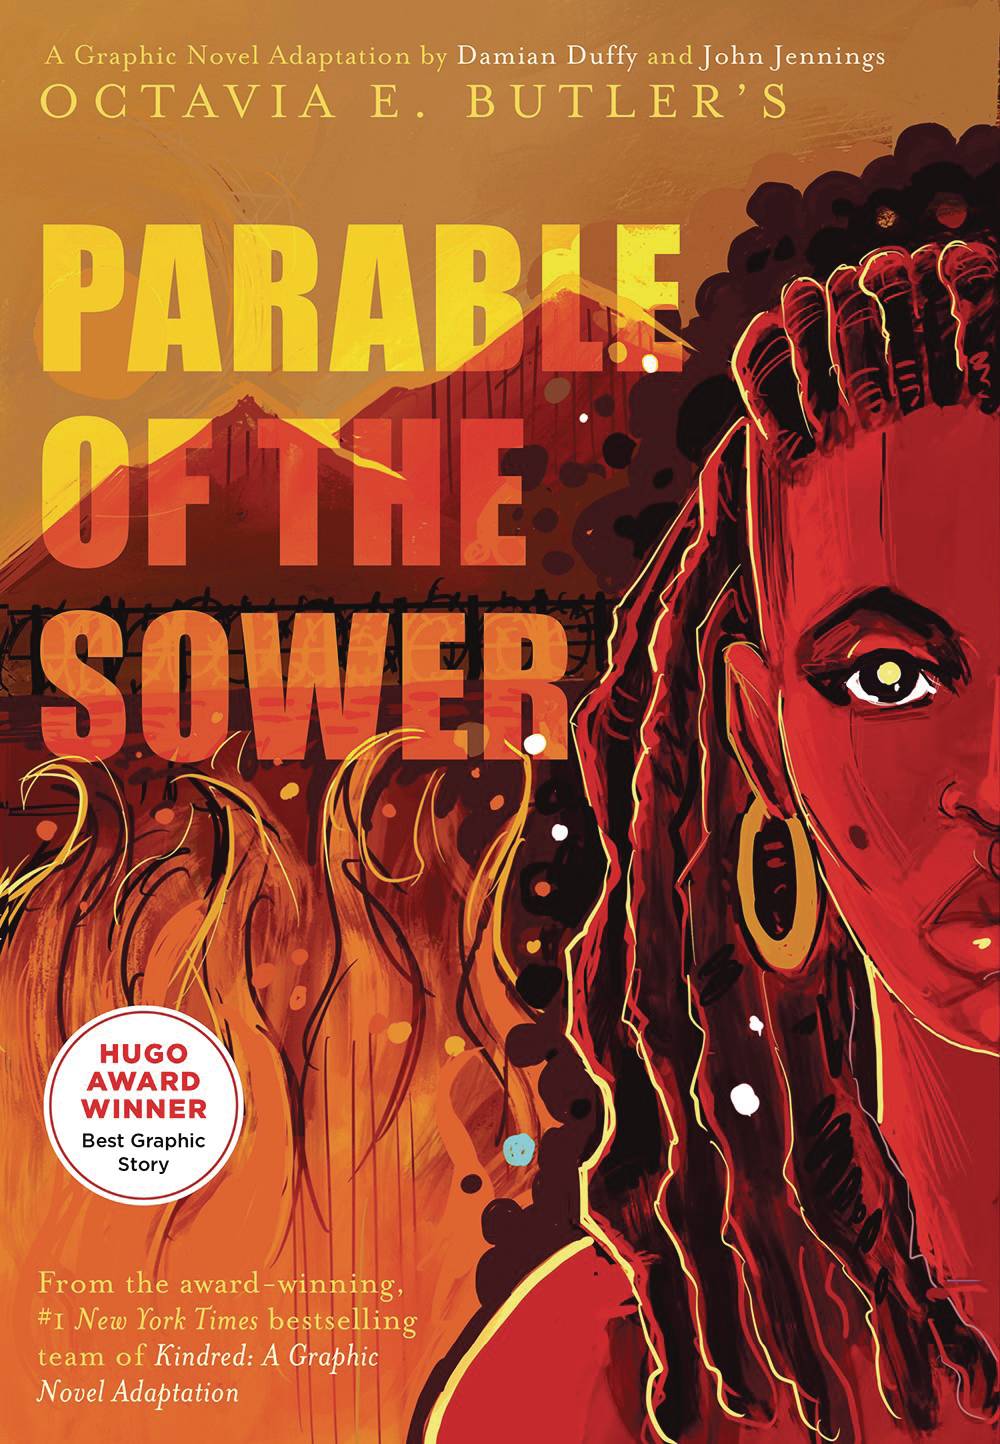 OCTAVIA BUTLER PARABLE OF THE SOWER GN